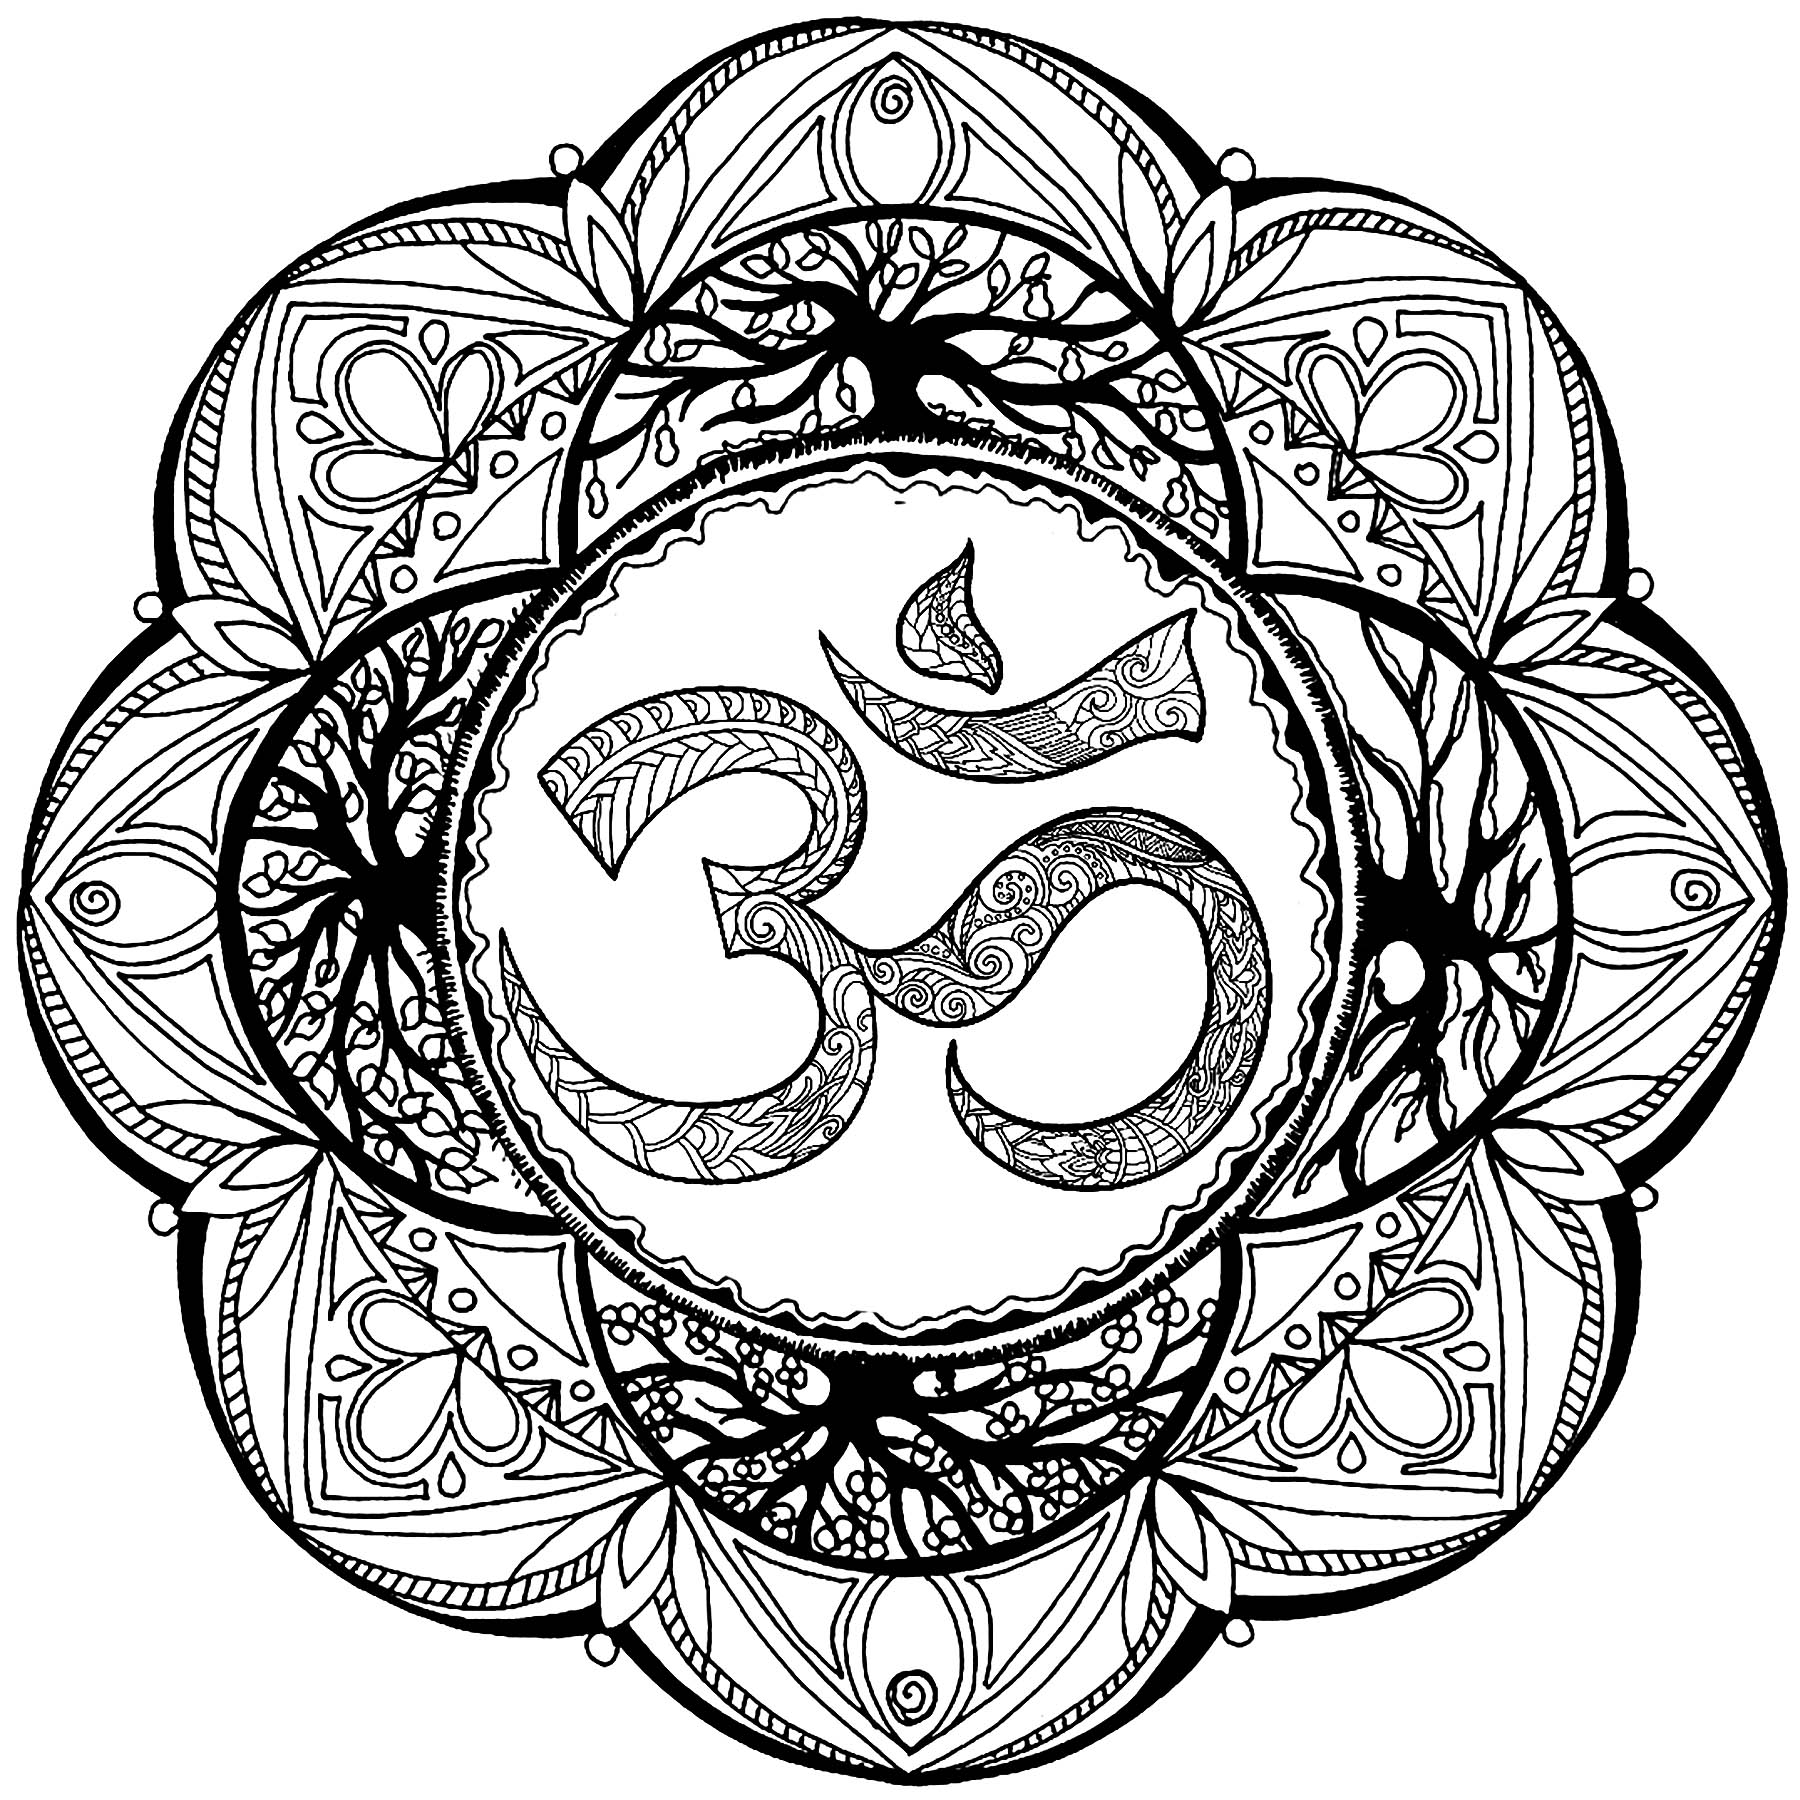 This Mandala with the Om symbol is perfect if you want to take time to color, be relaxed and calm ... and feel all the benefits of coloring.